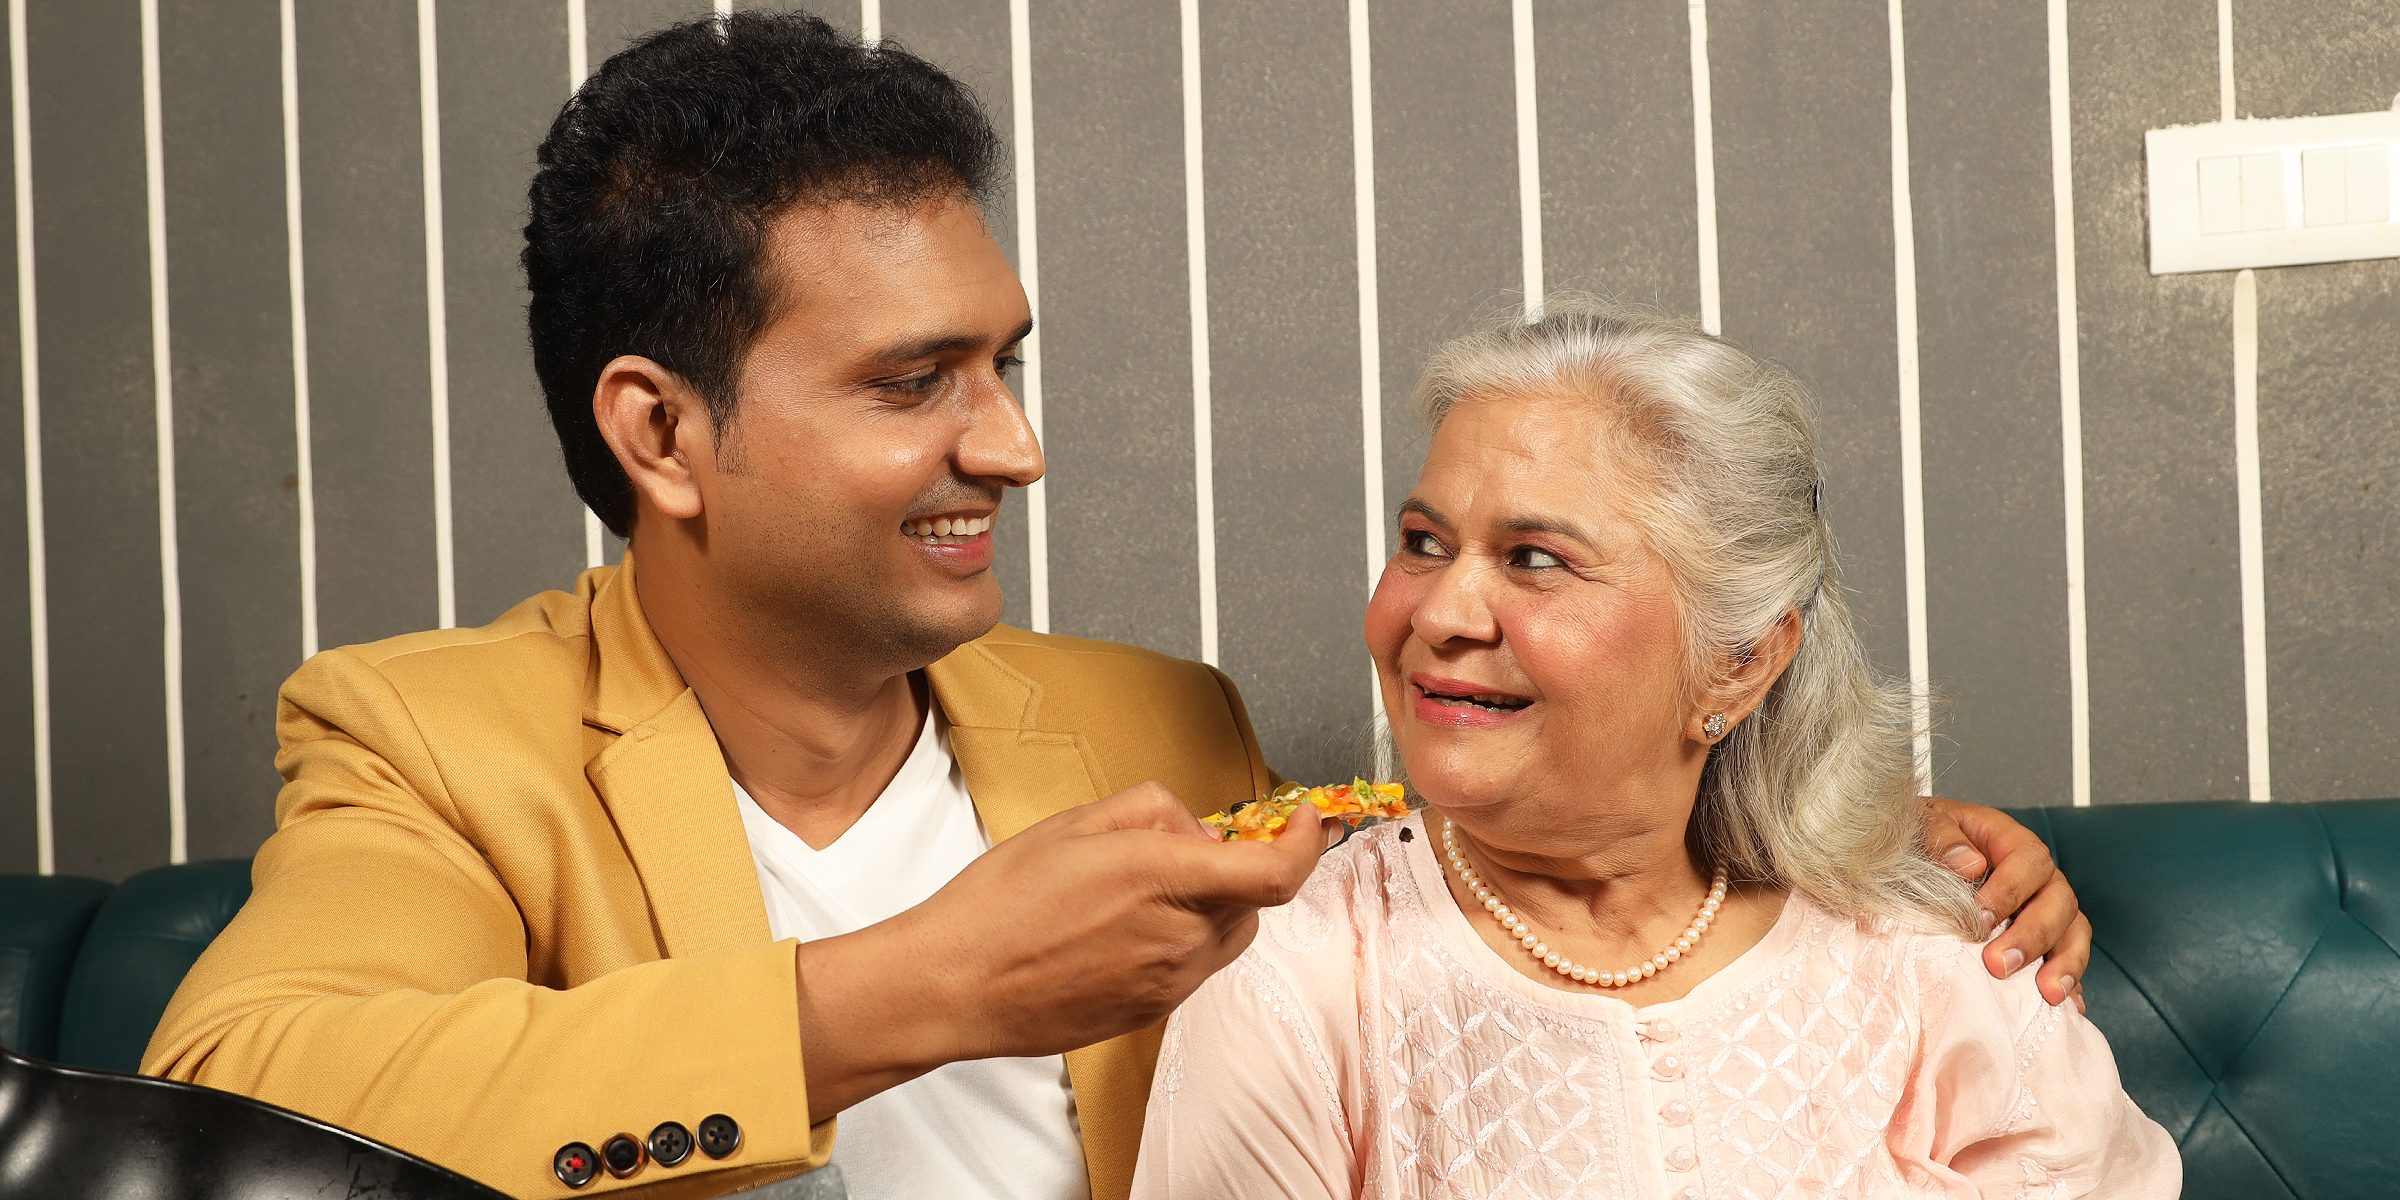 Mother and son eating pizza. For illustration purposes only | Source: Shutterstock